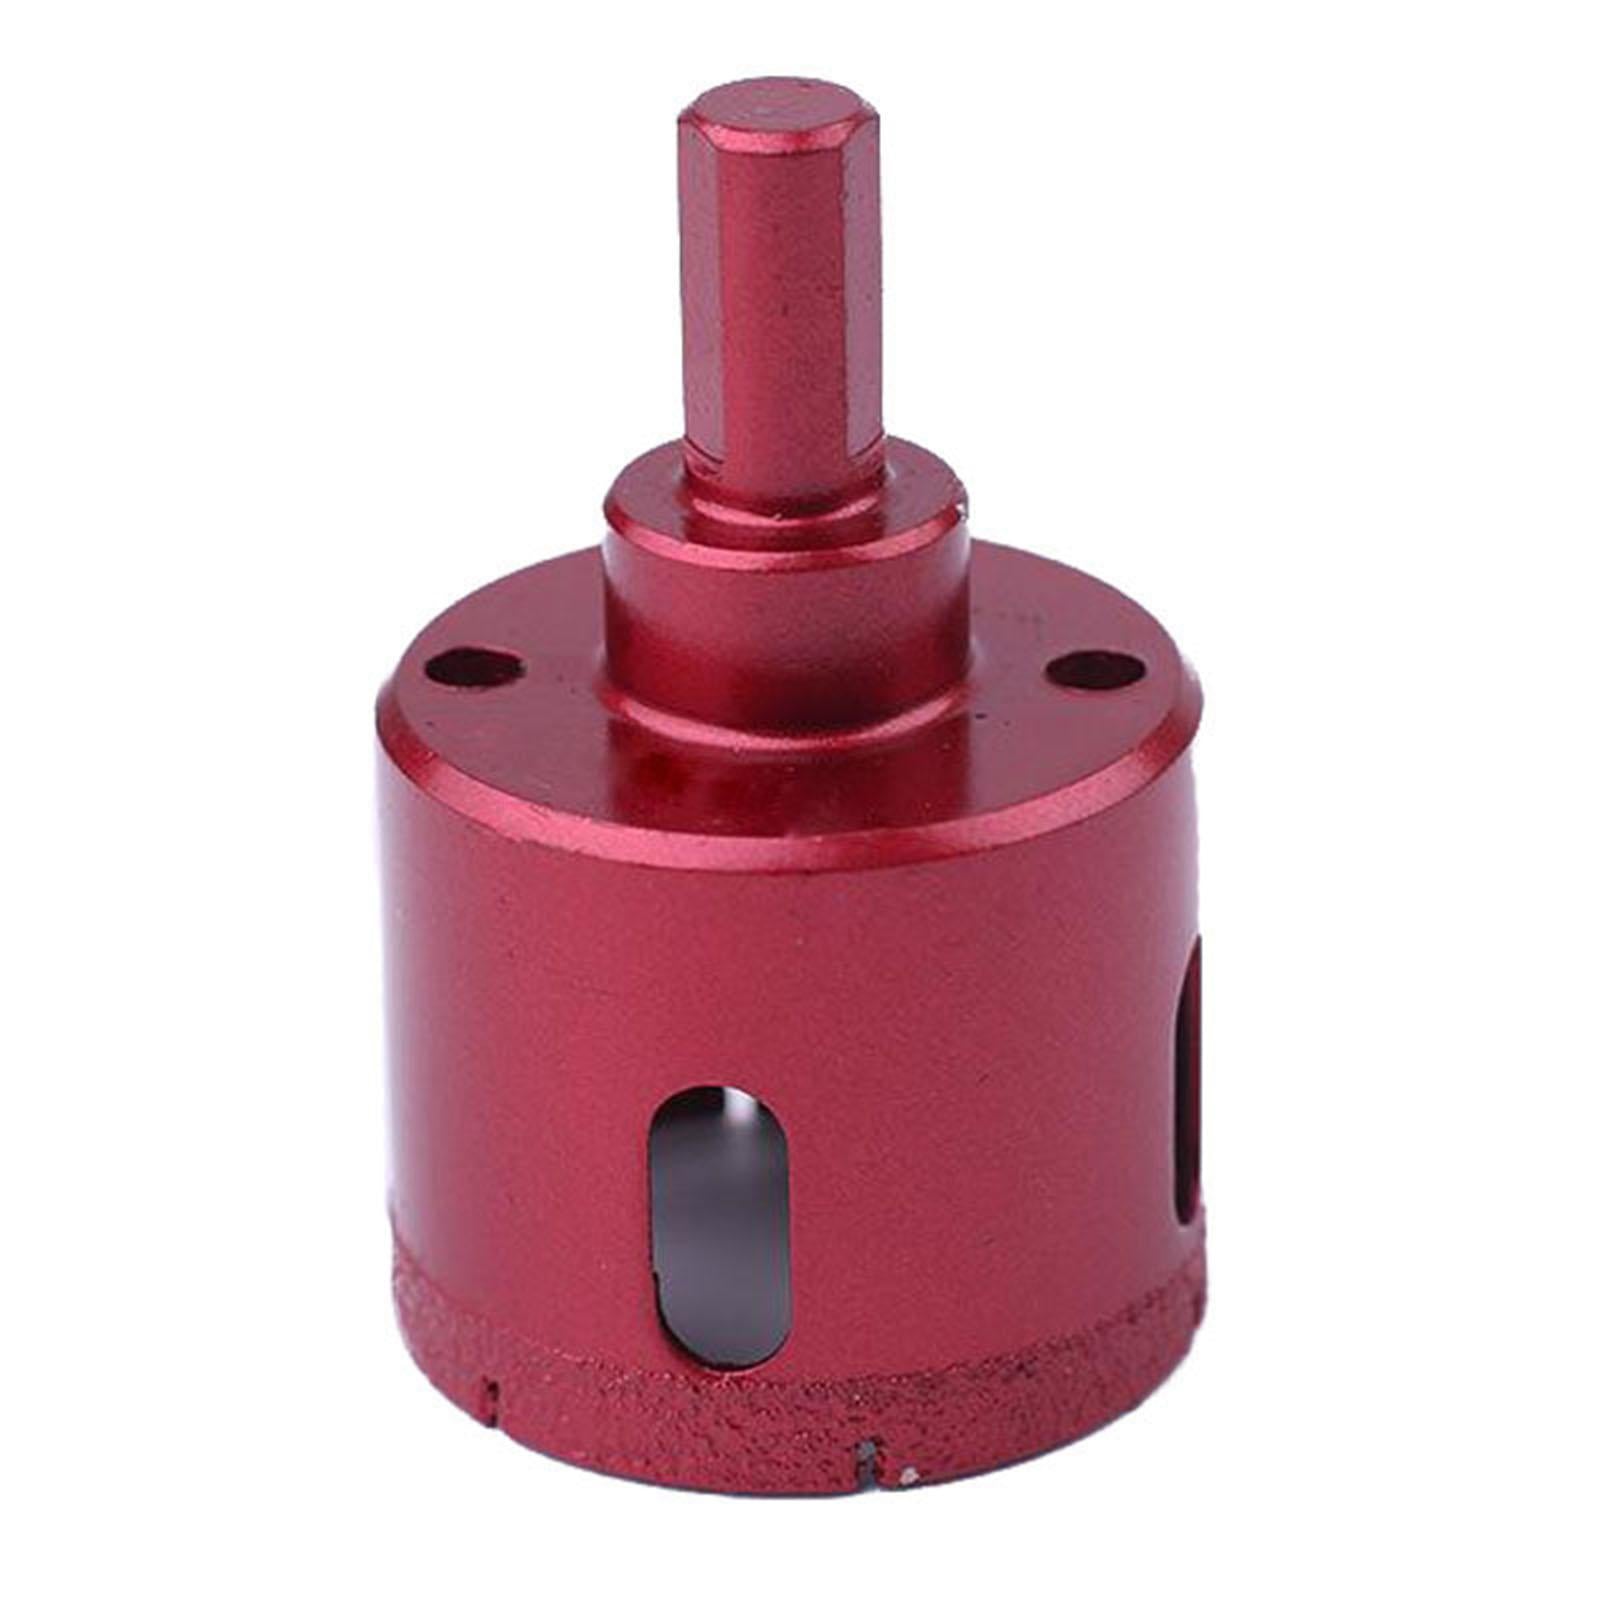 Diamond Hole Saw Drill Bit Tool Cutter for Tile Glass Marble Ceramic 6-50mm